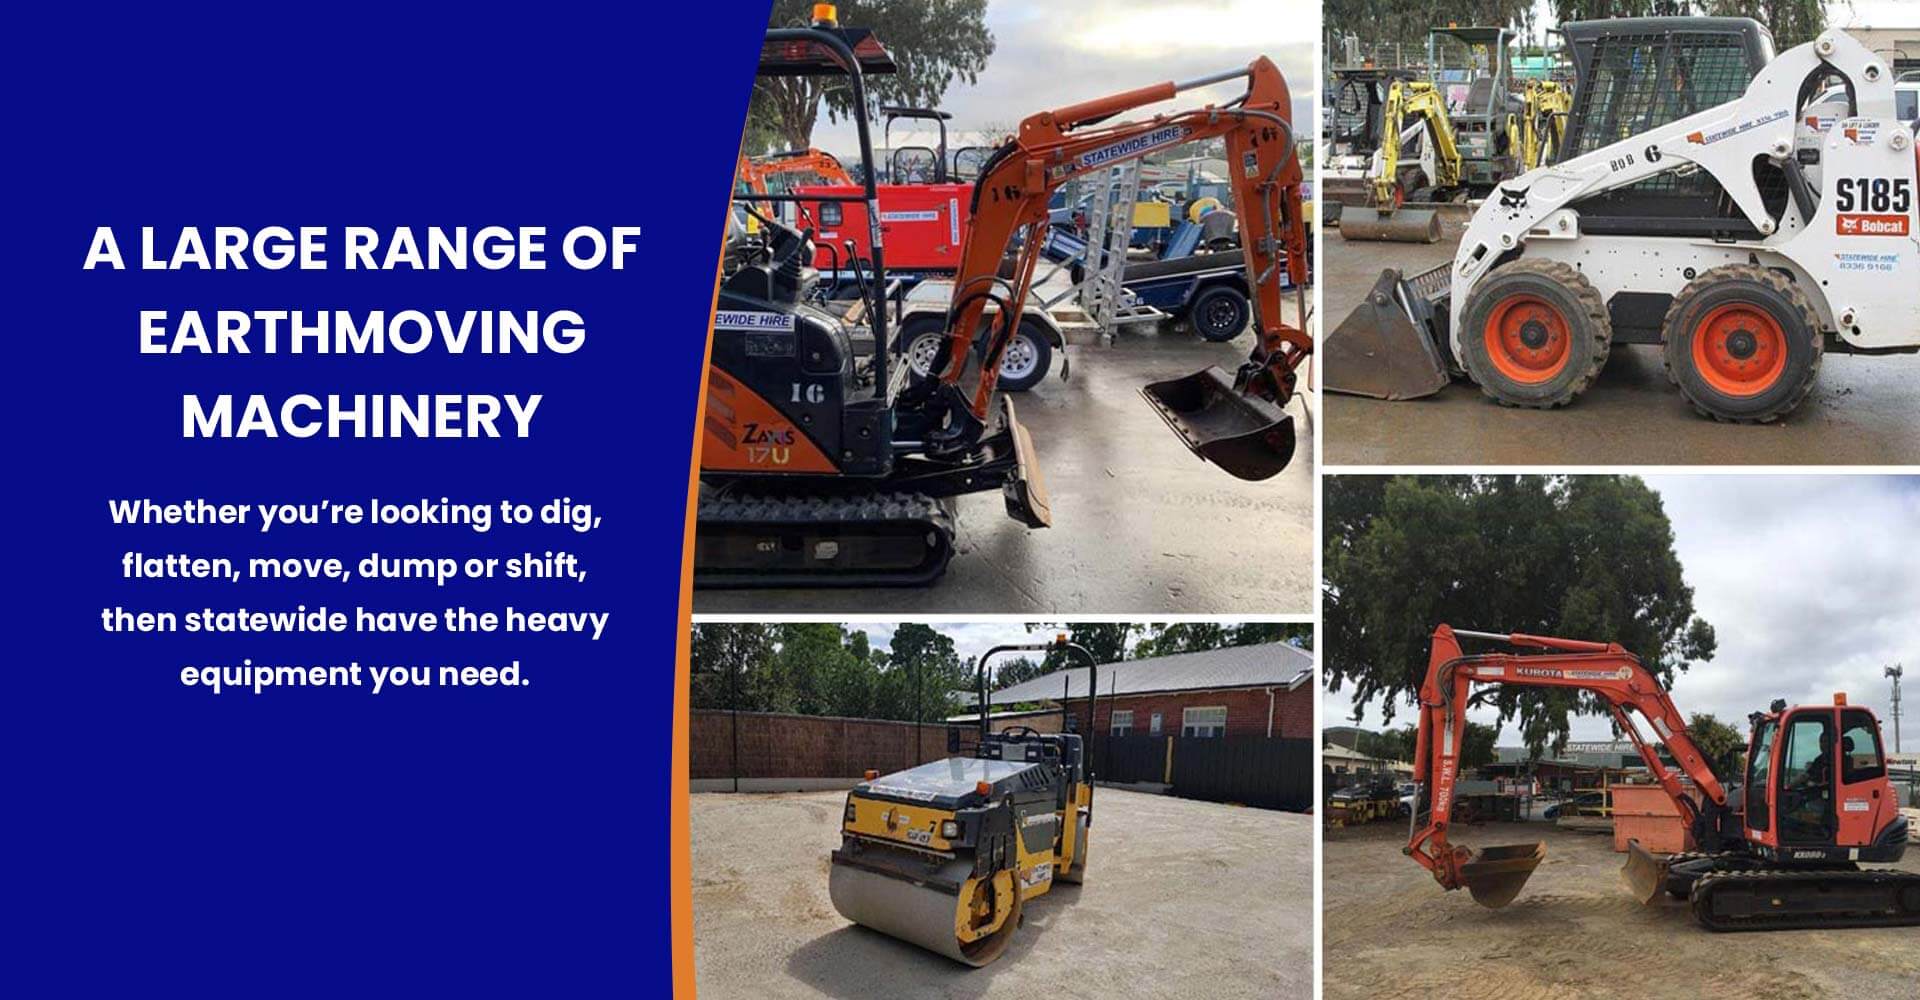 Excavator-Hire-And-Earthmoving-Machinery-For-Hire-Heavy-Equipment-Hire-Digger-Hire